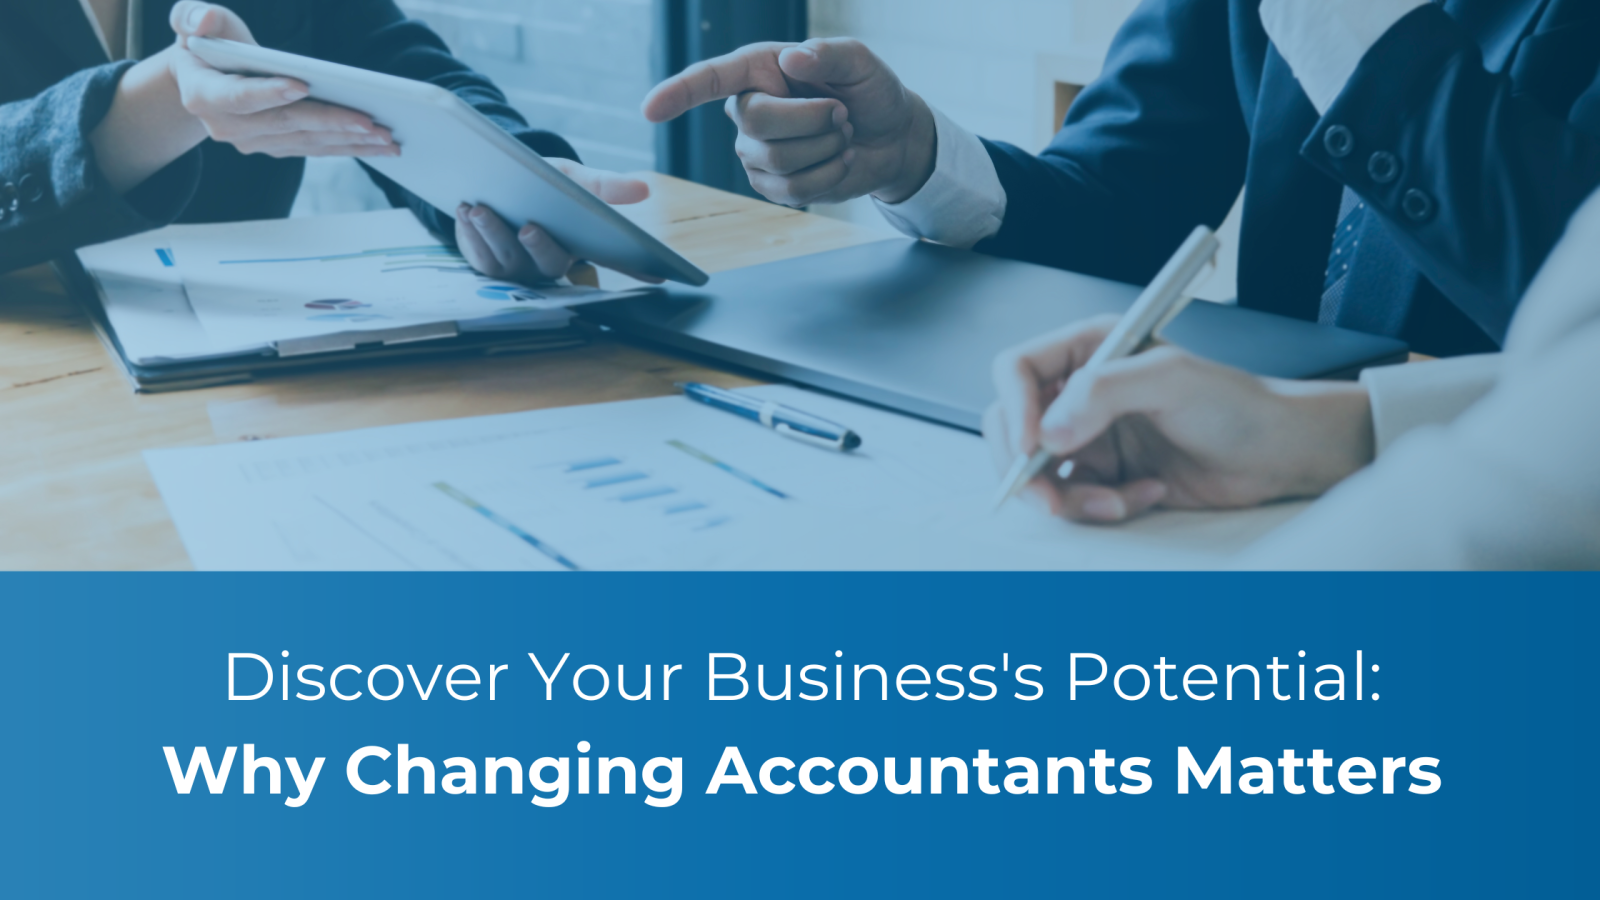 Discover Your Business's Potential: Why Changing Accountants Matters